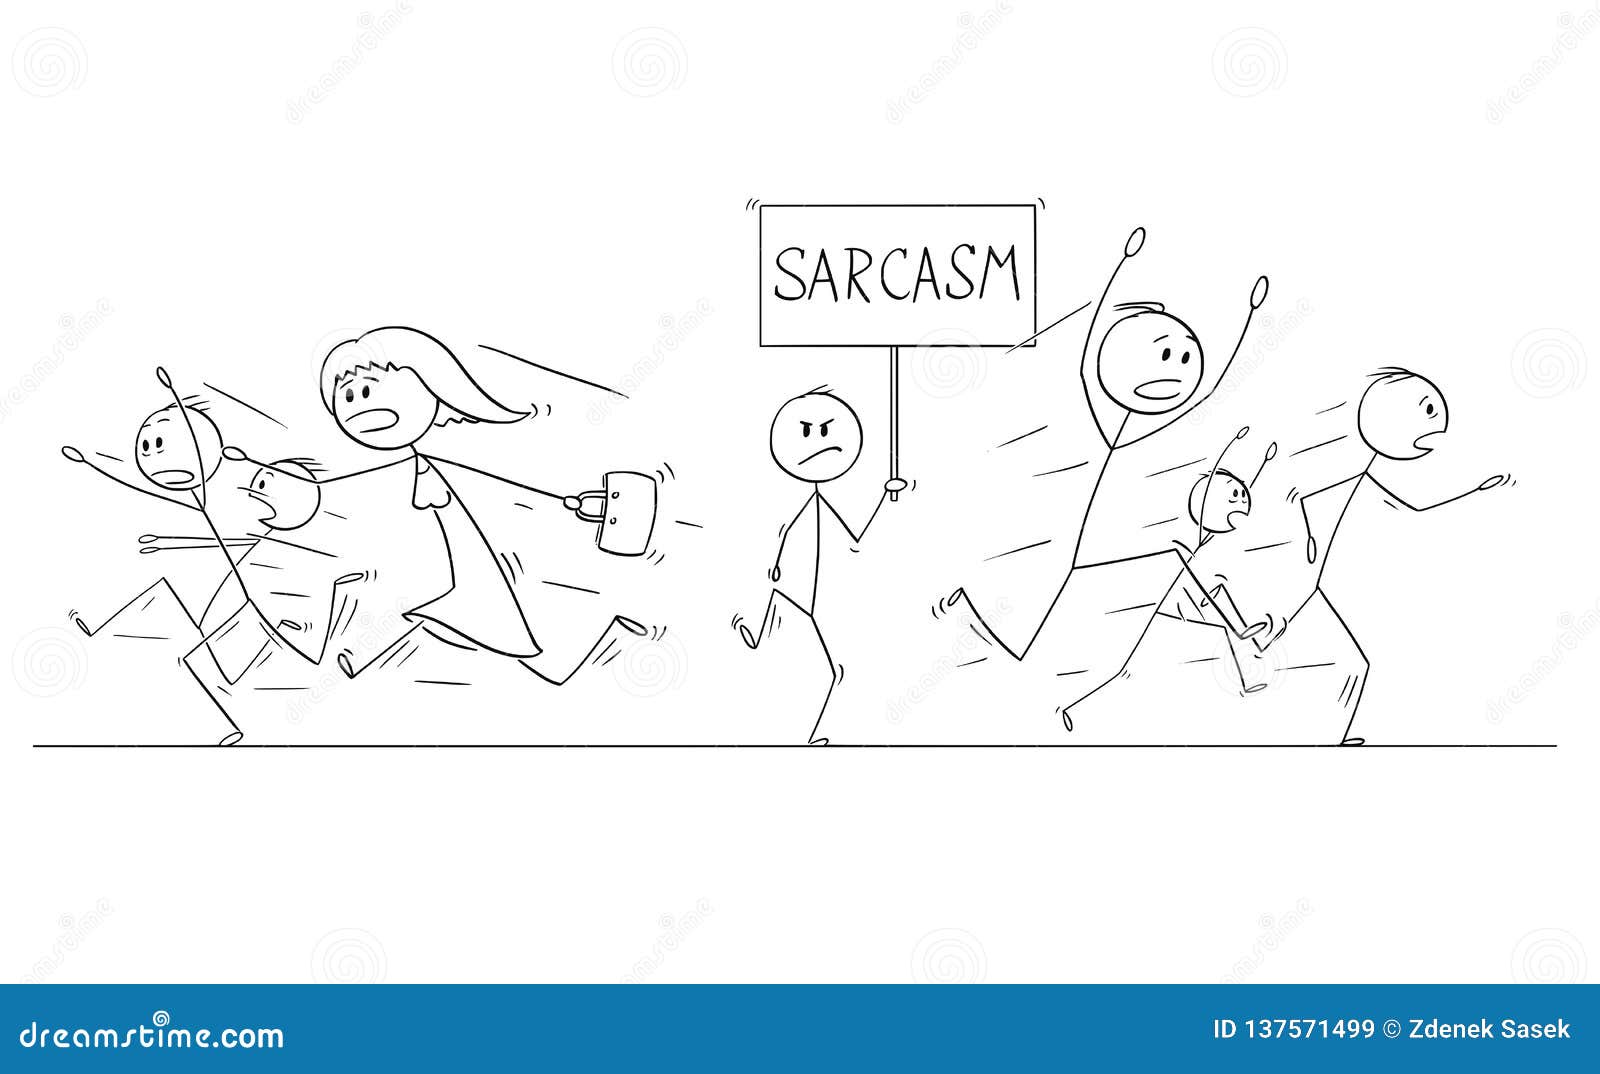 cartoon drawing of crowd of people running in panic away from man with sarcasm sign